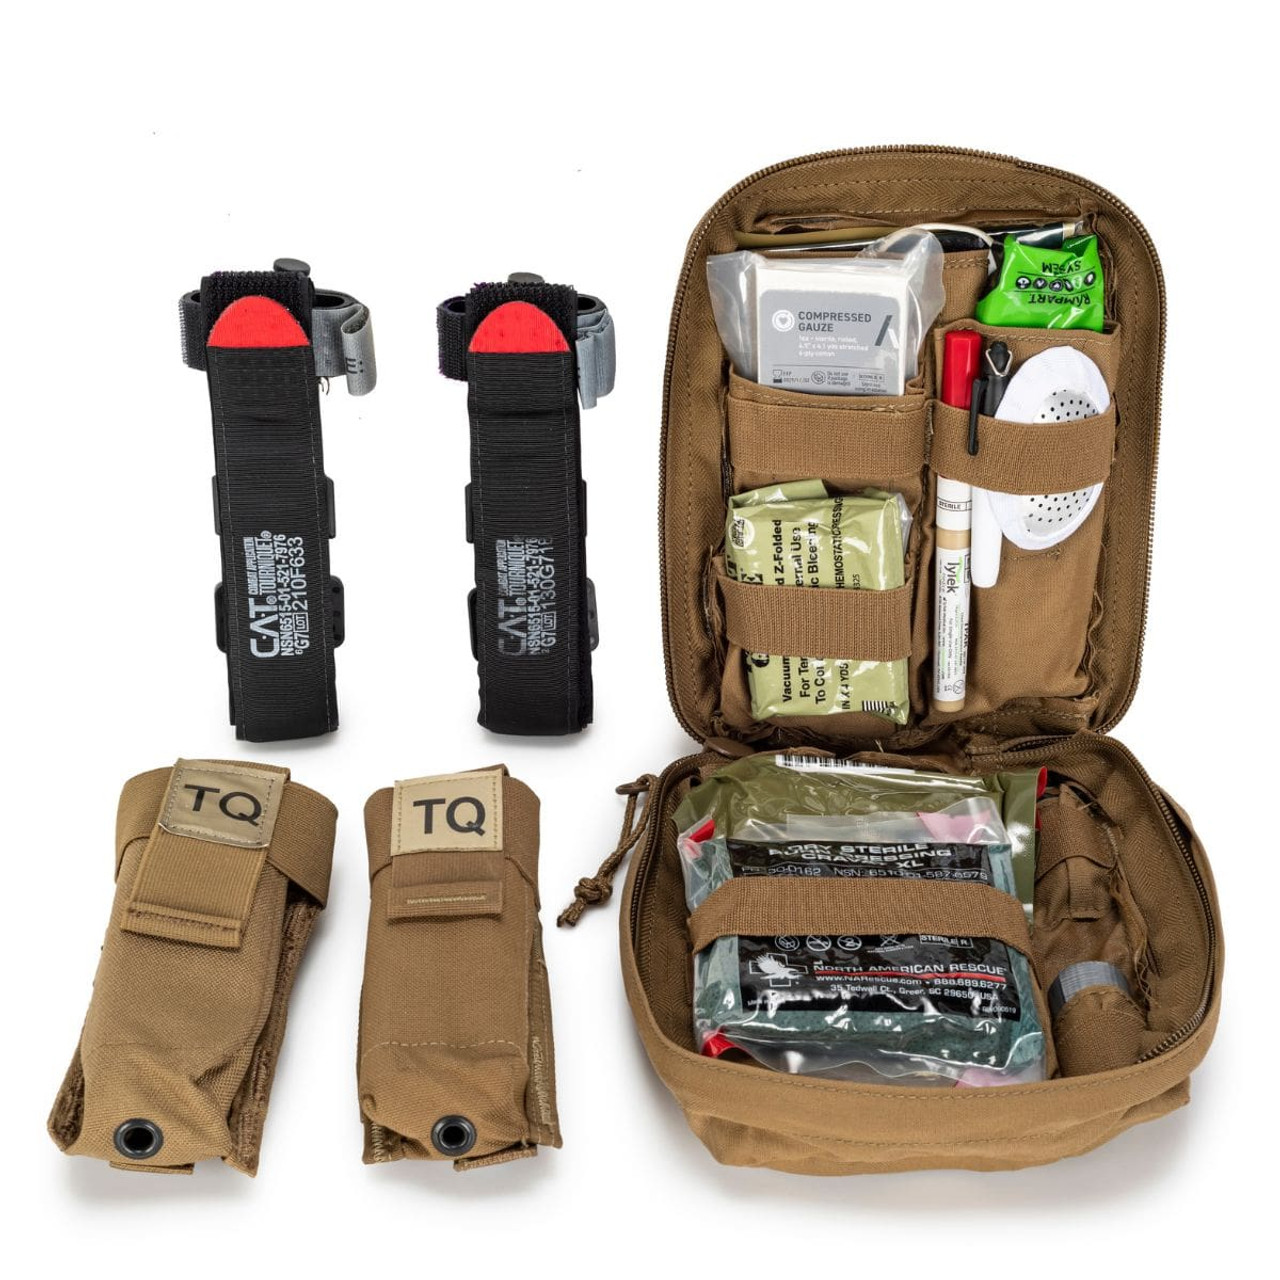 DIY IFAK Medical Kit for Military, Police, and First Responders